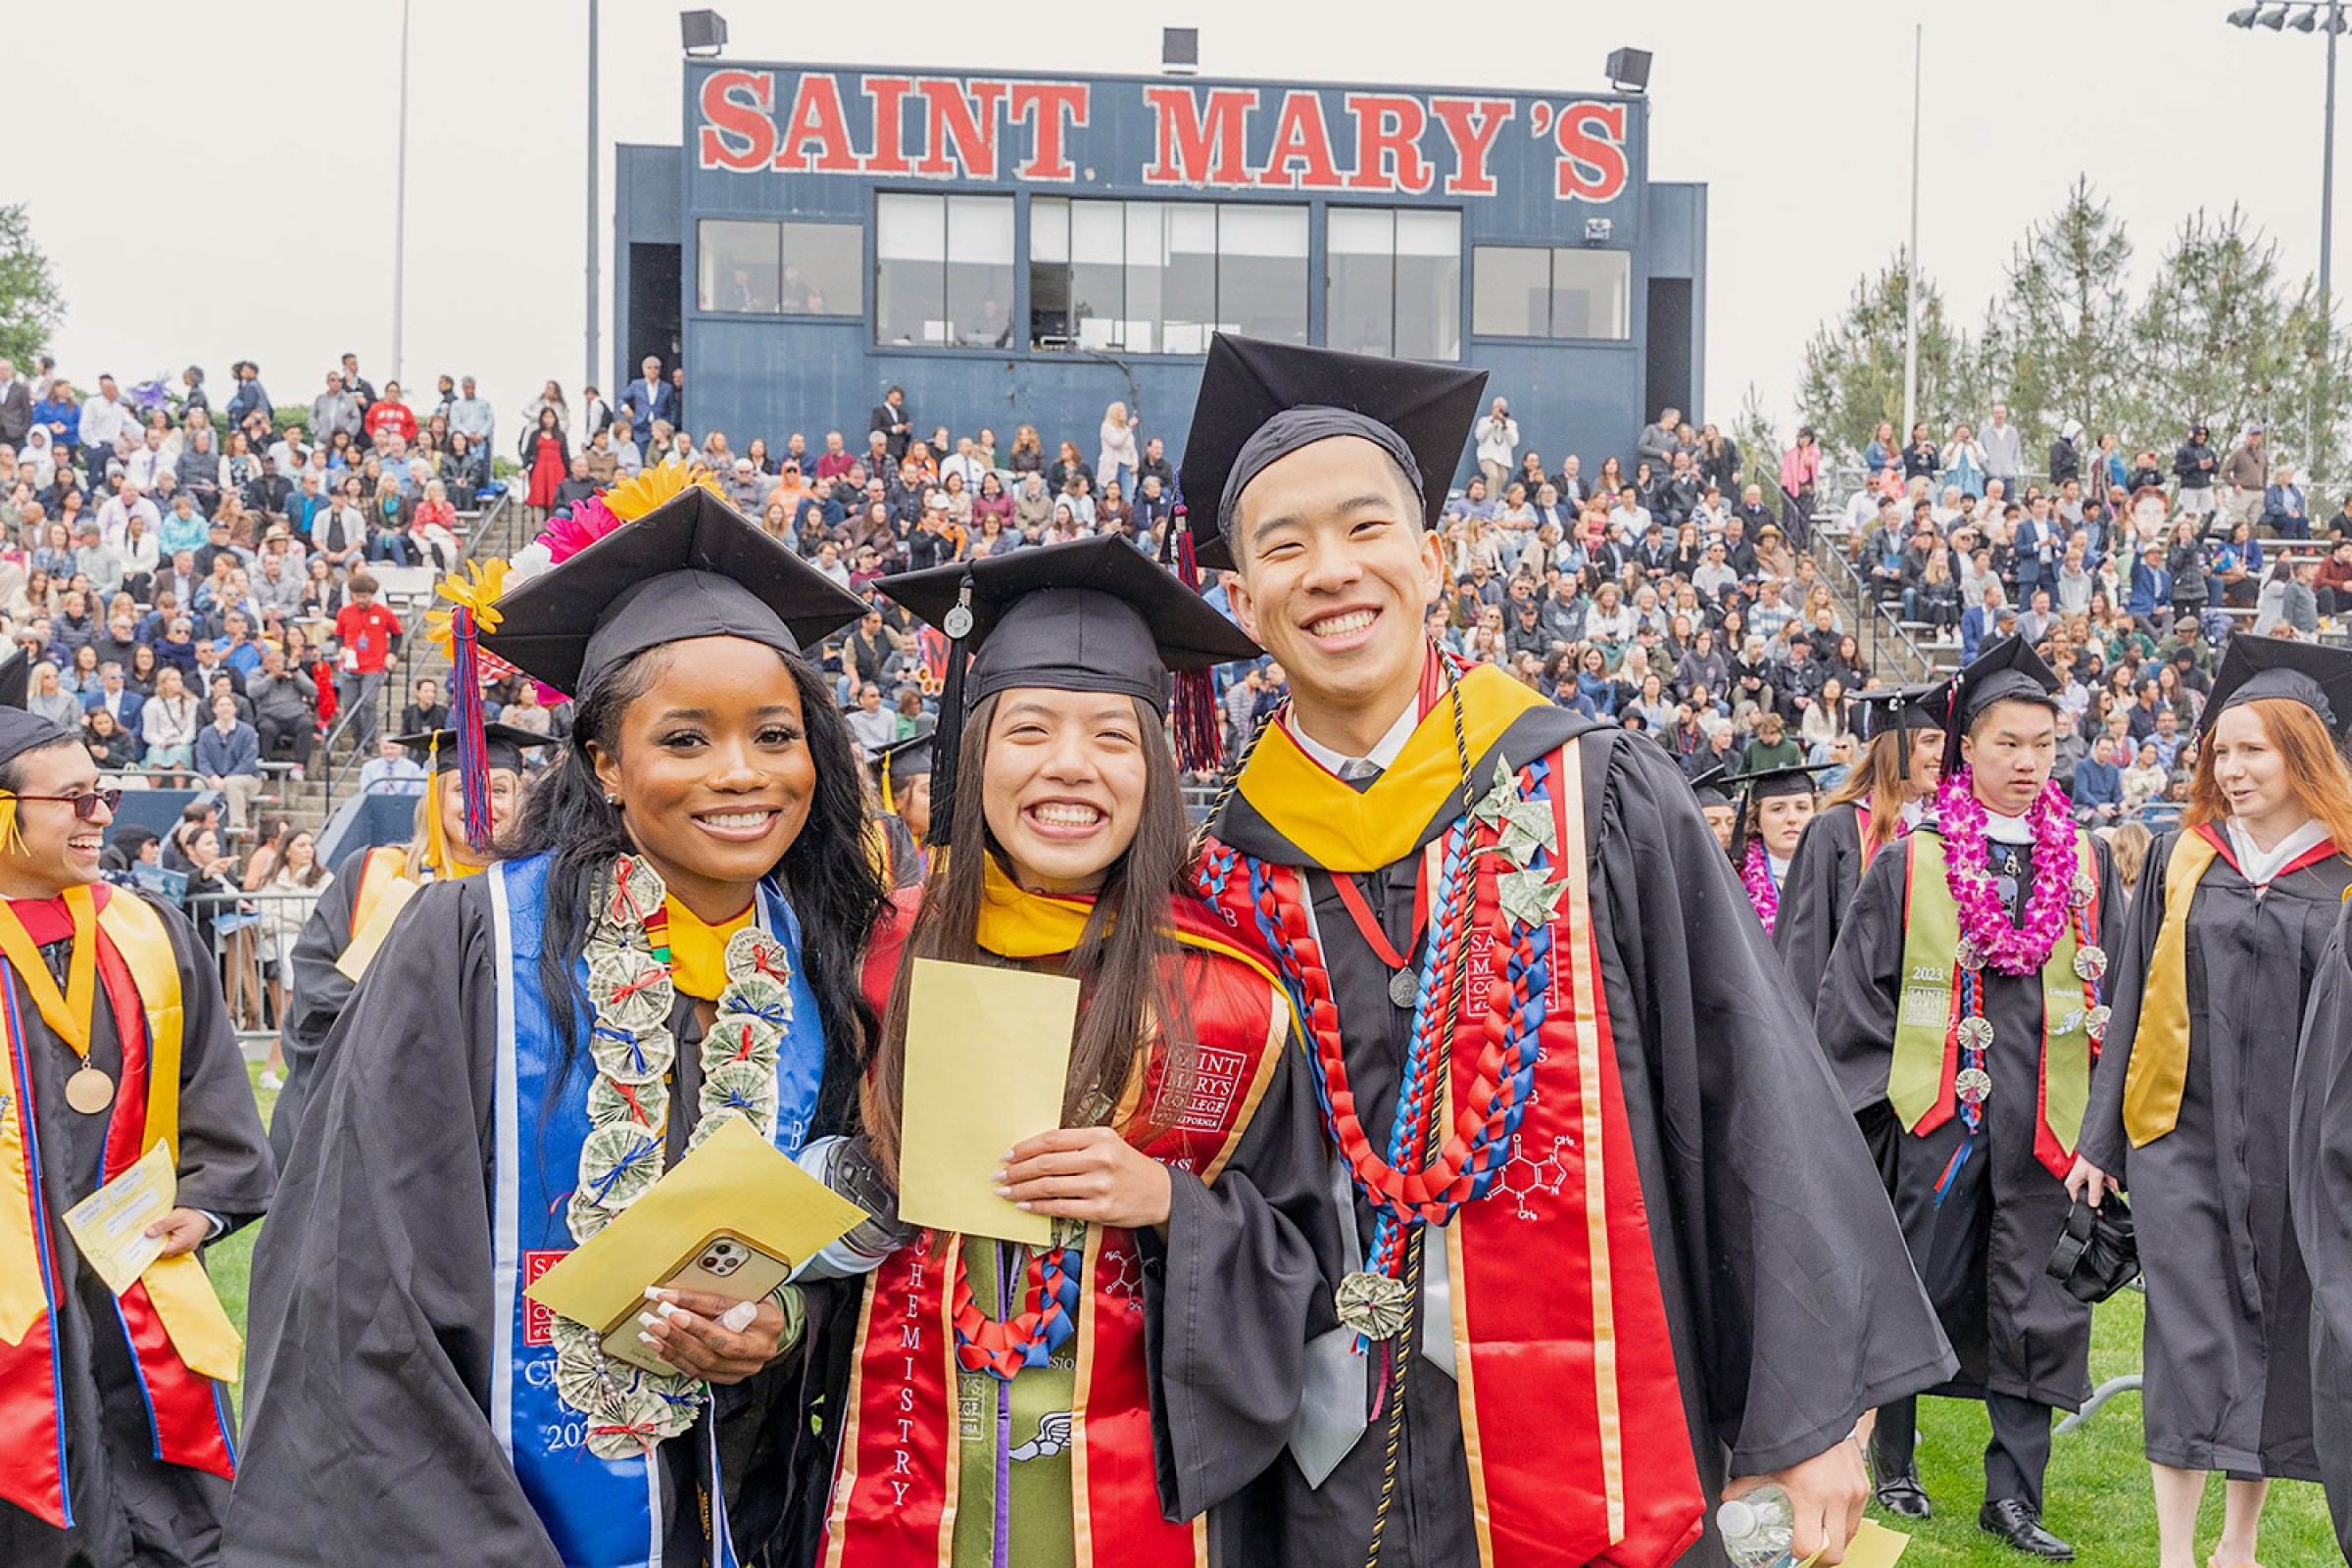 At 2023 Commencement, three students beneath the Saint Mary's sign on the soccer field